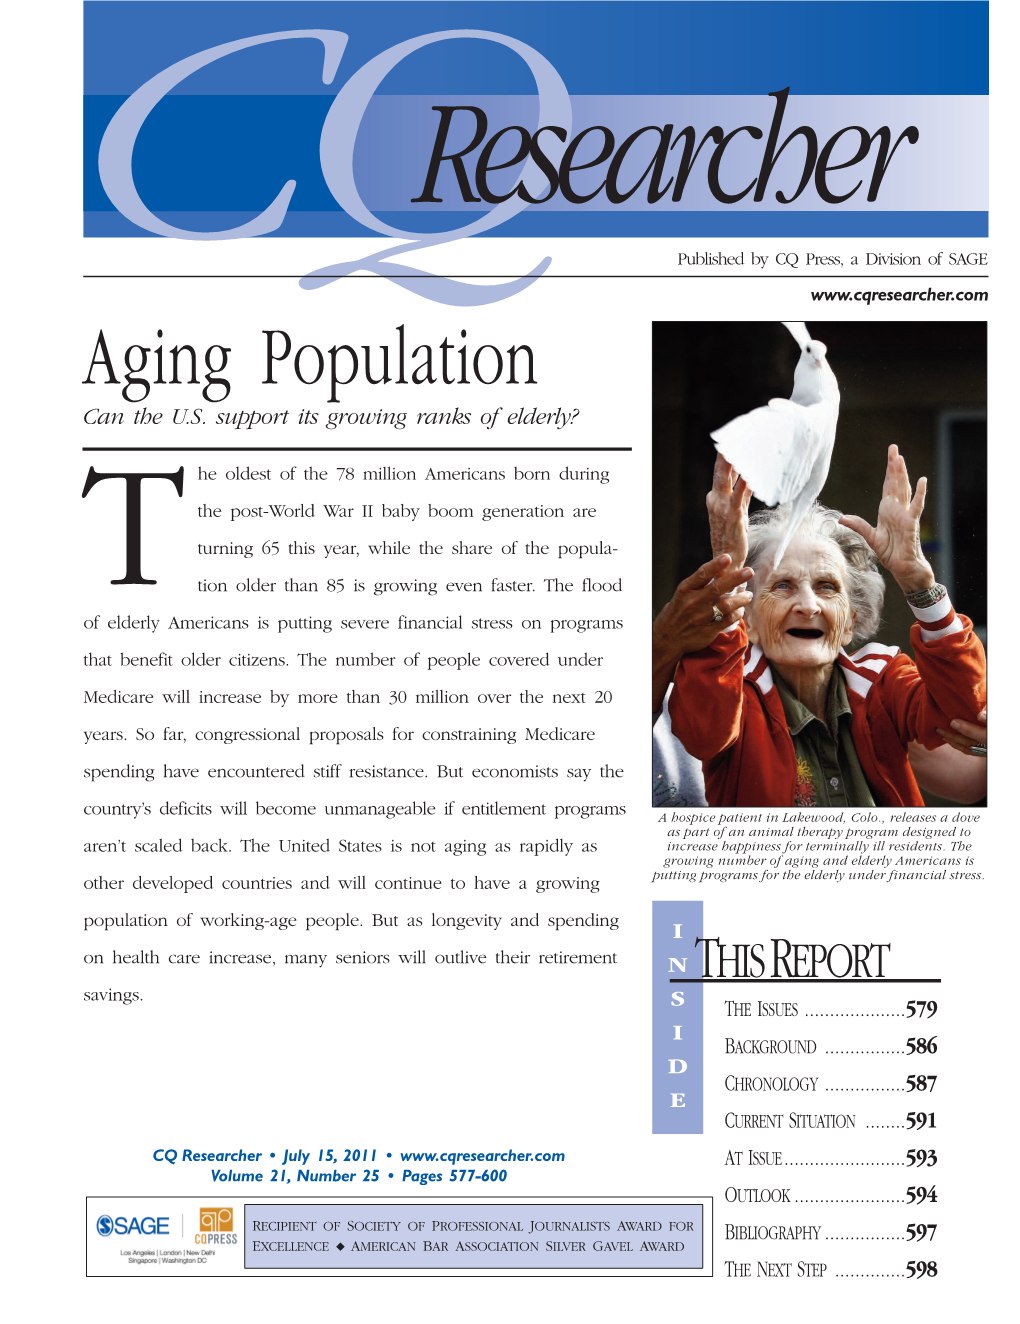 Aging Population Can the U.S